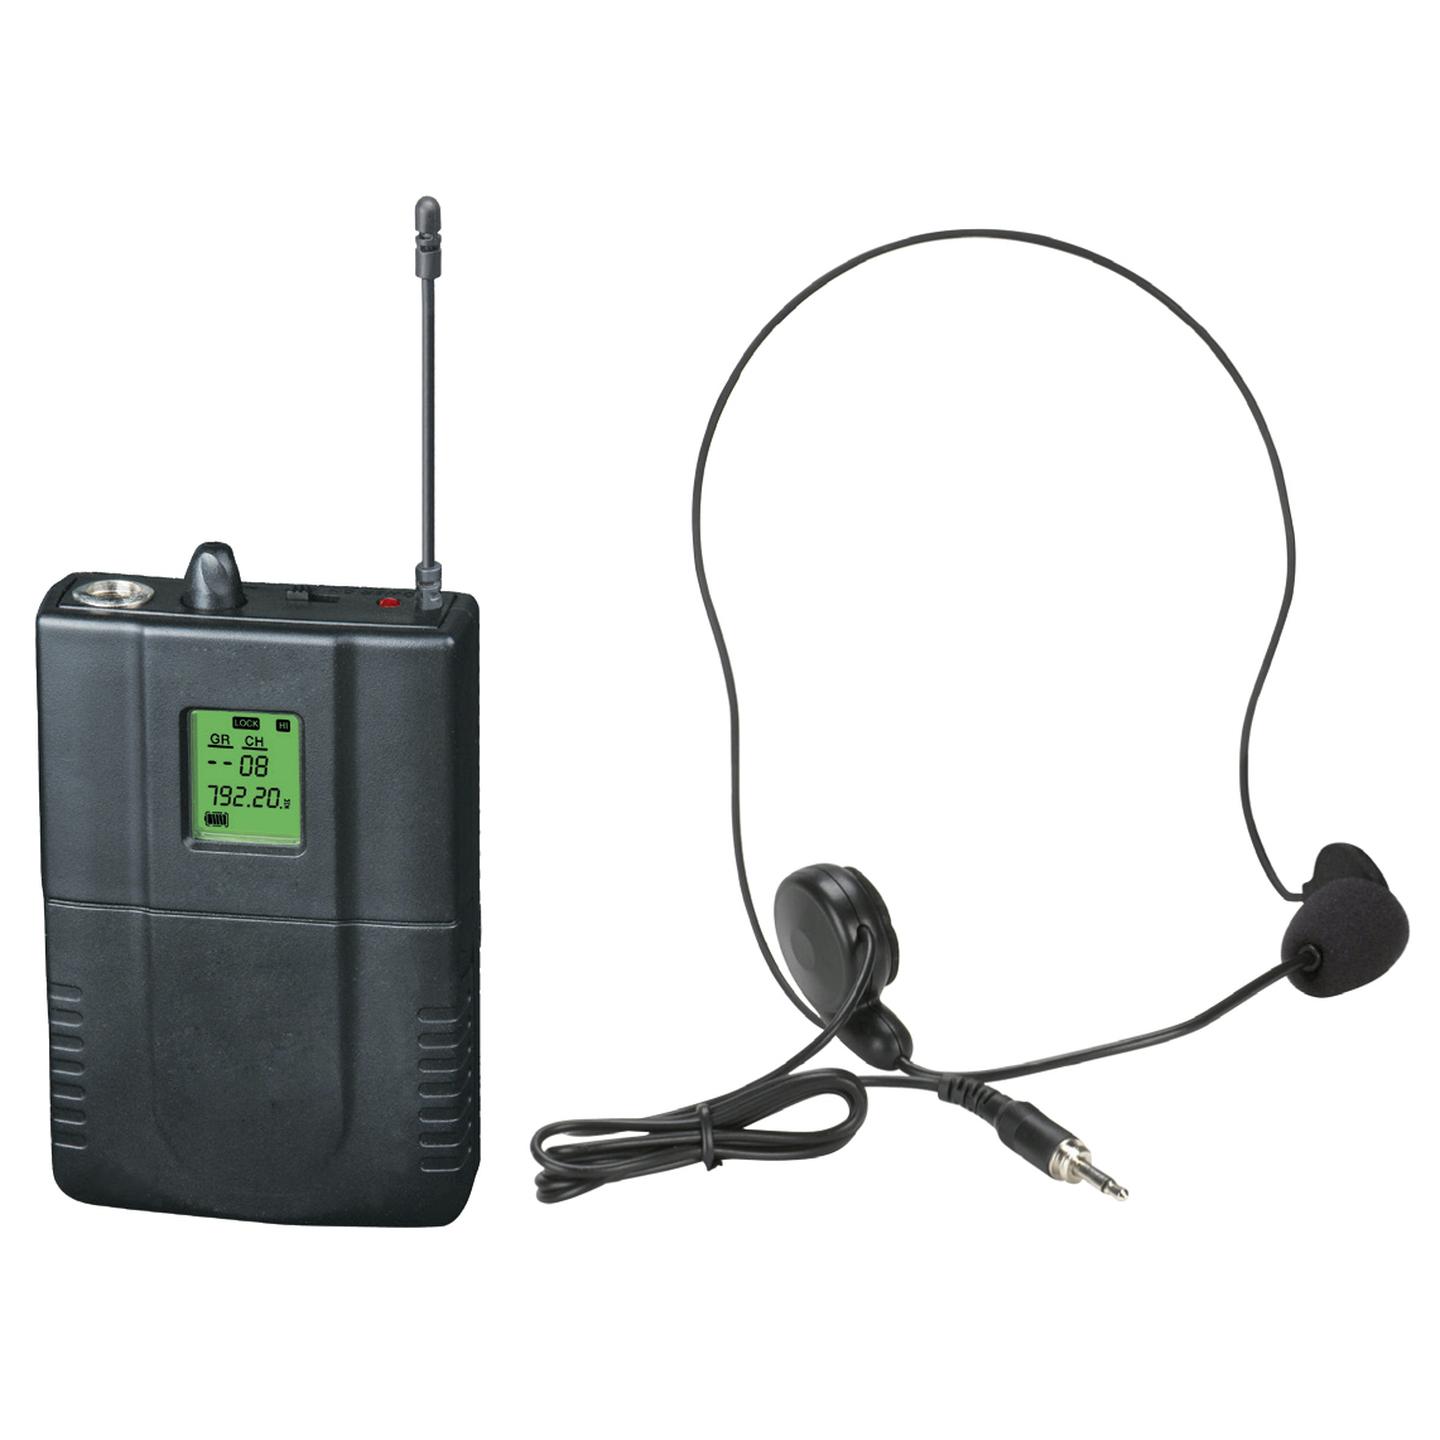 Wireless Lapel Microphone to suit AM4170